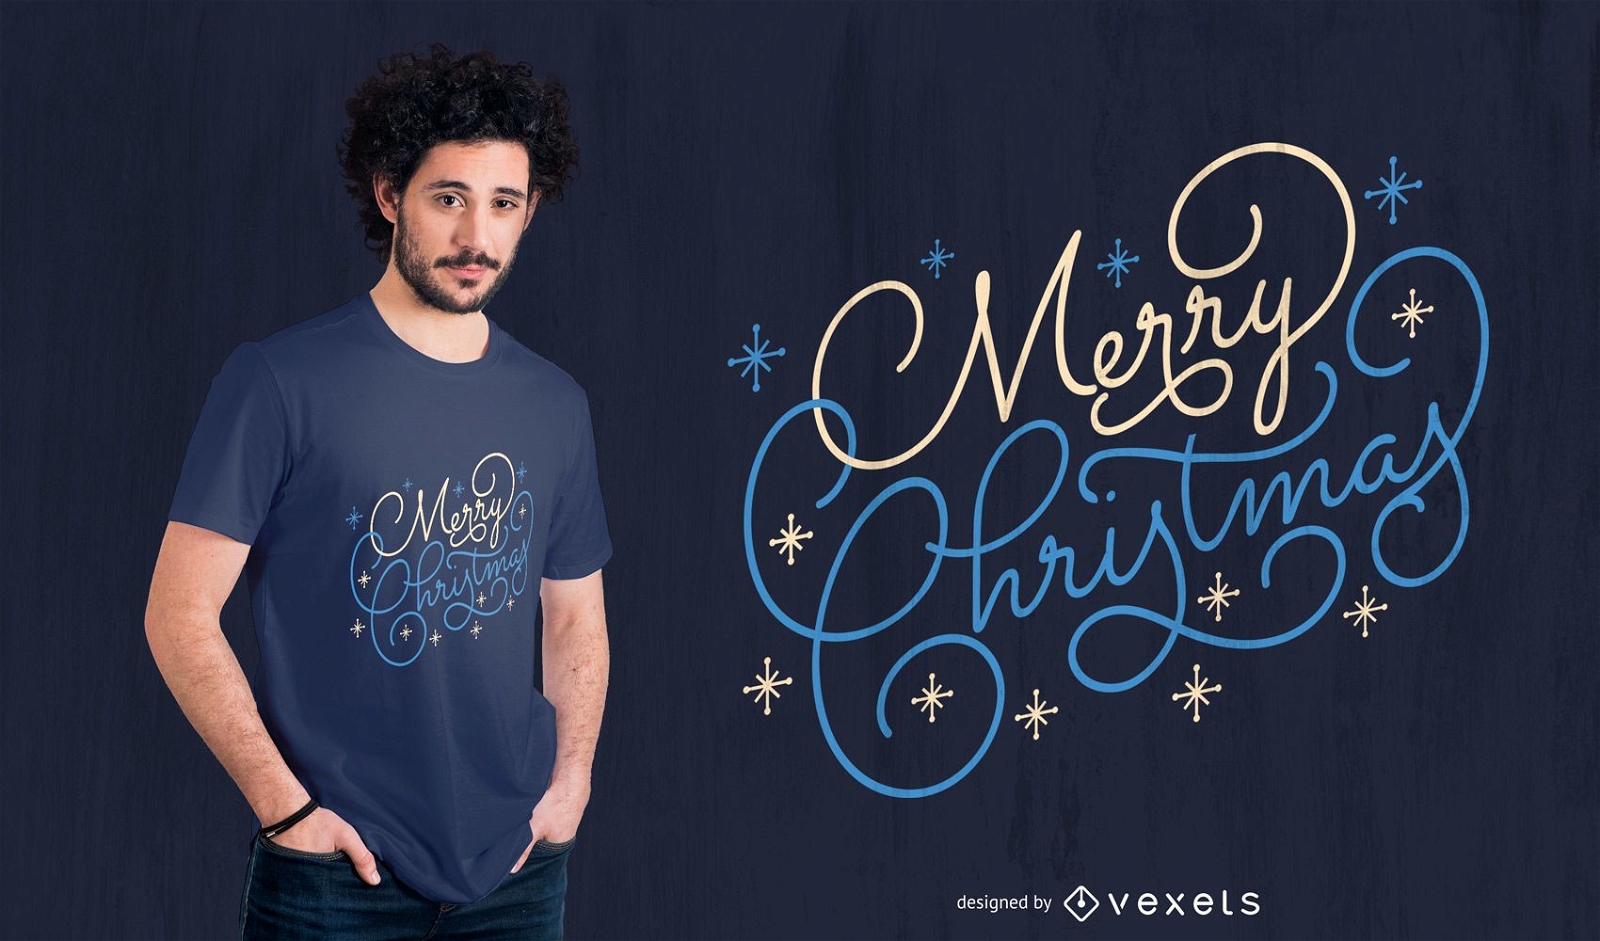 Merry Christmas quote t-shirt design